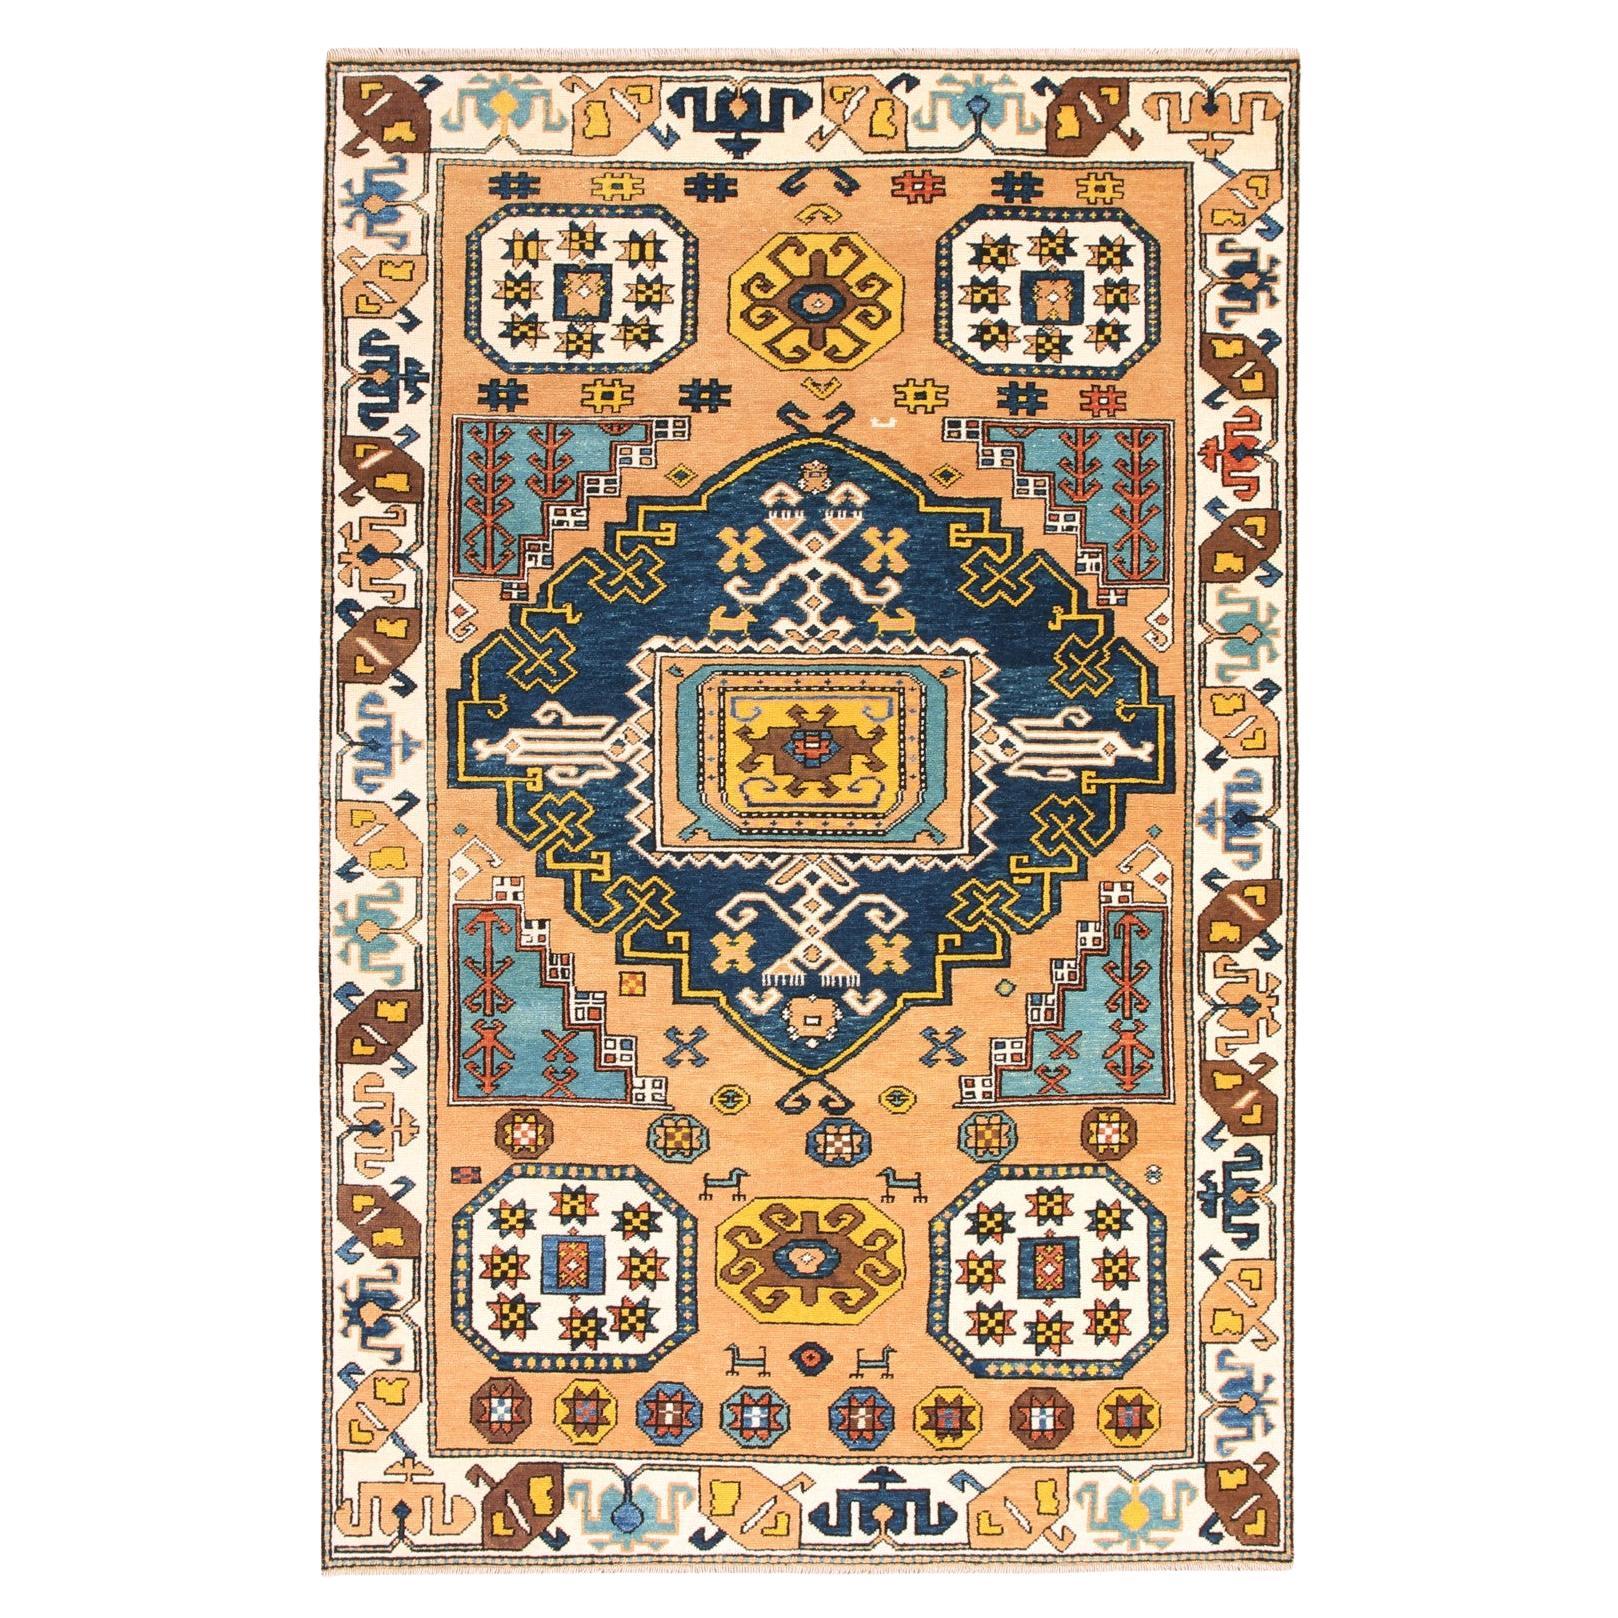 Ararat Rugs Village Rug with Medallion, Anatolian Revival Carpet Natural Dyed